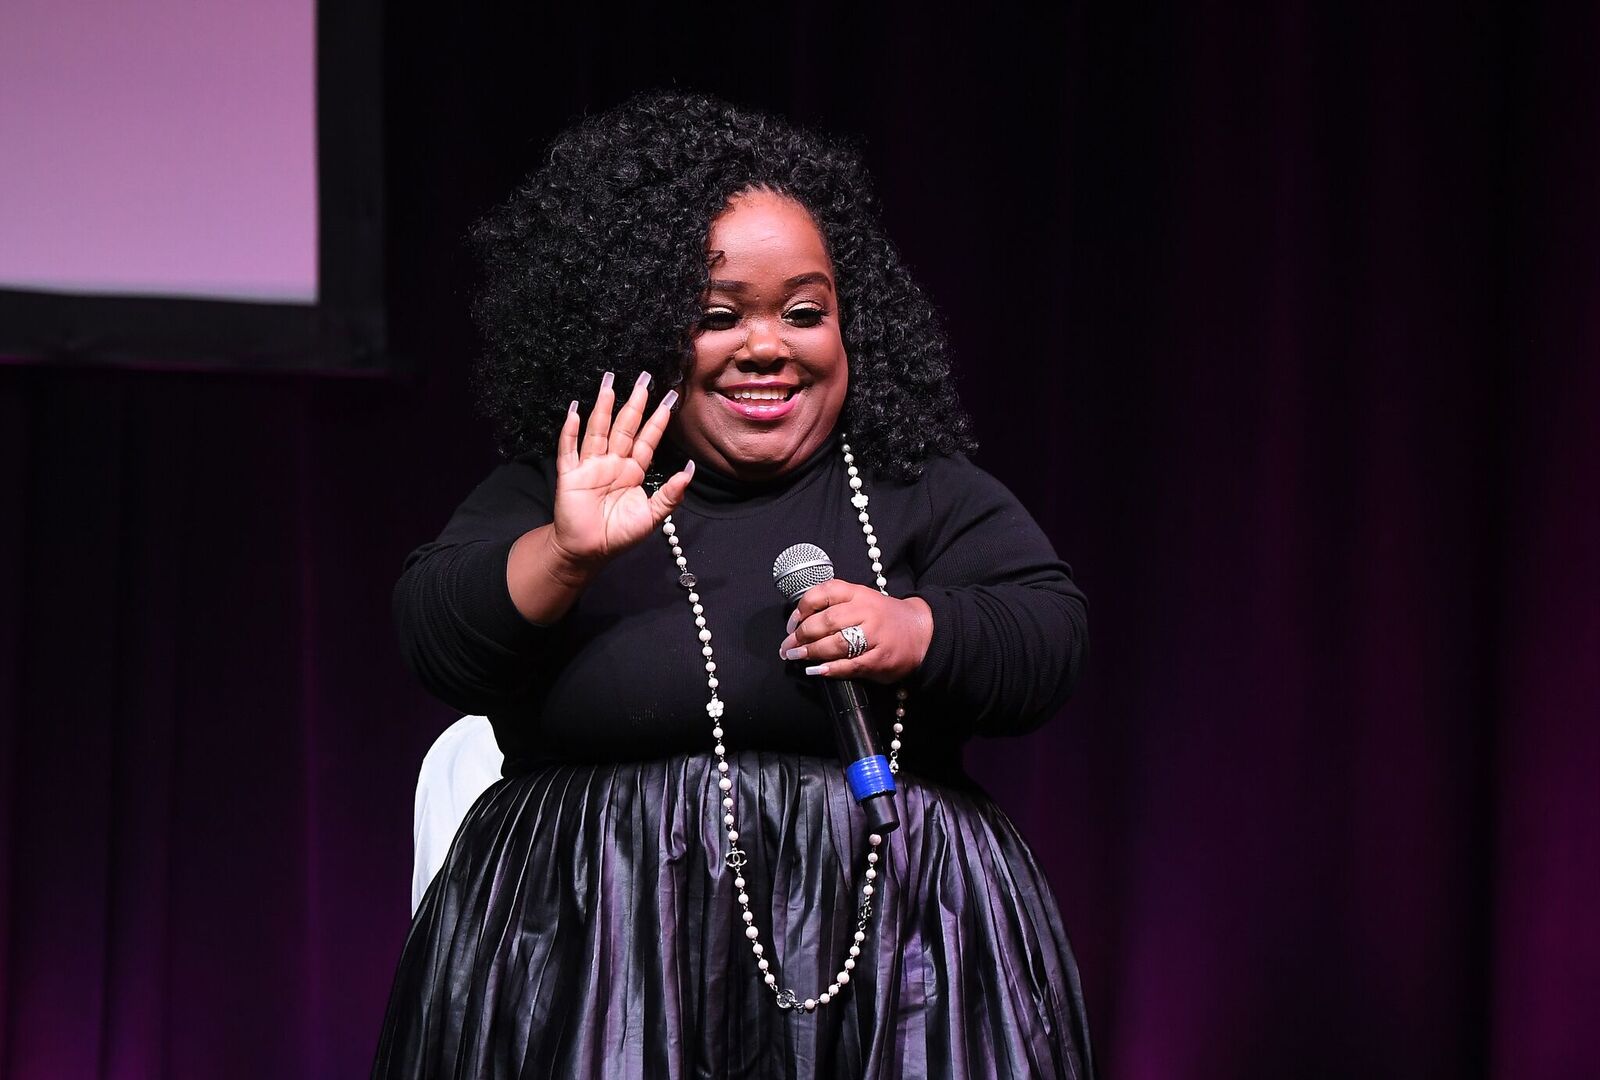 Ashley "Minnie" Ross onstage at the Atlanta Ultimate Women's Expo on November 10, 2019, in Georgia | Photo: Paras Griffin/Getty Images